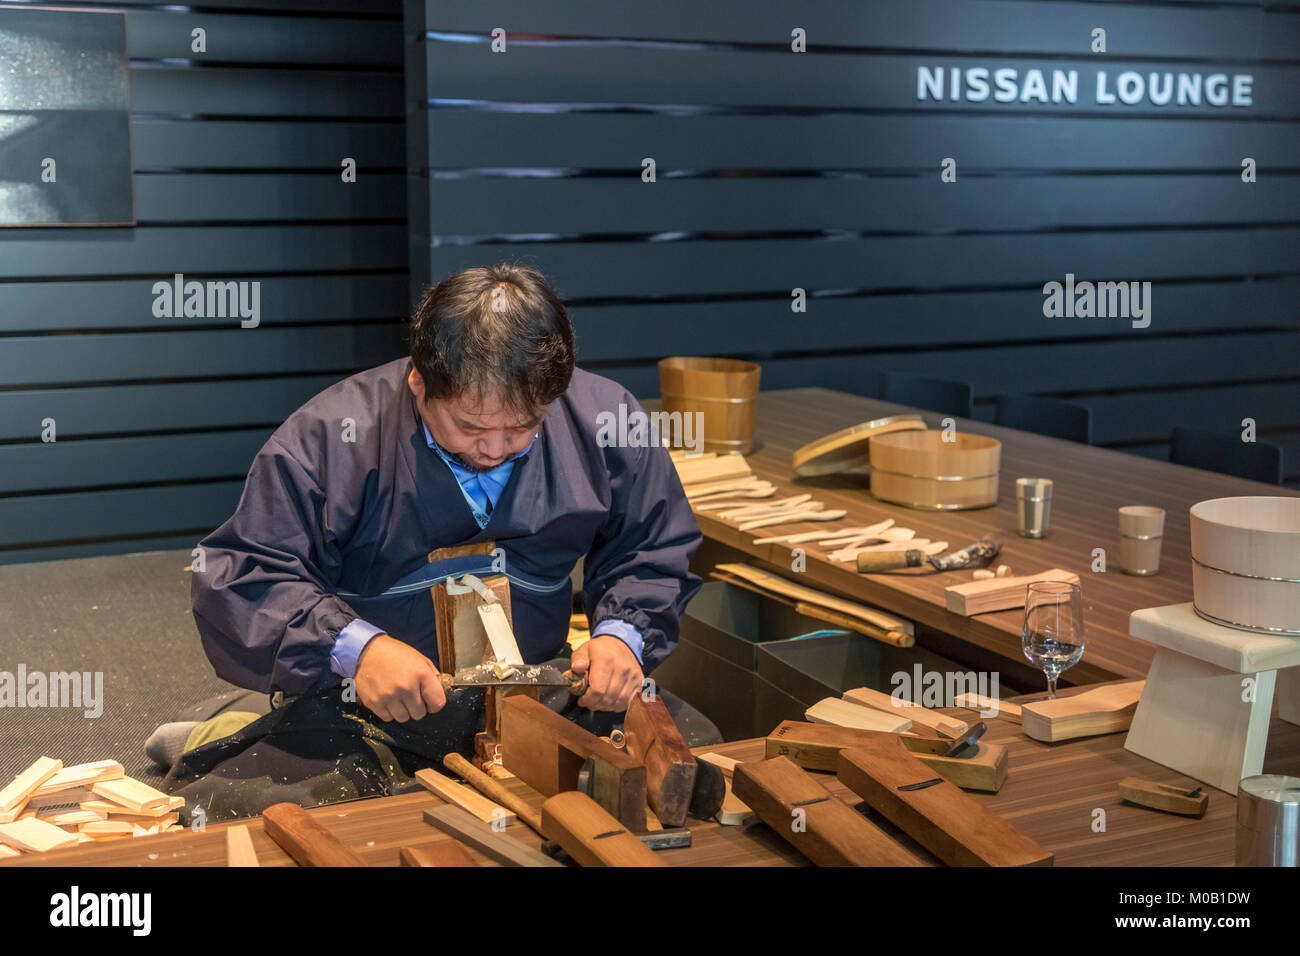 Detroit, Michigan - Craftspeople from the GO ON collaborative in Kyoto, Japan demonstrated traditional Japanese crafts at the Nissan display during th Stock Photo